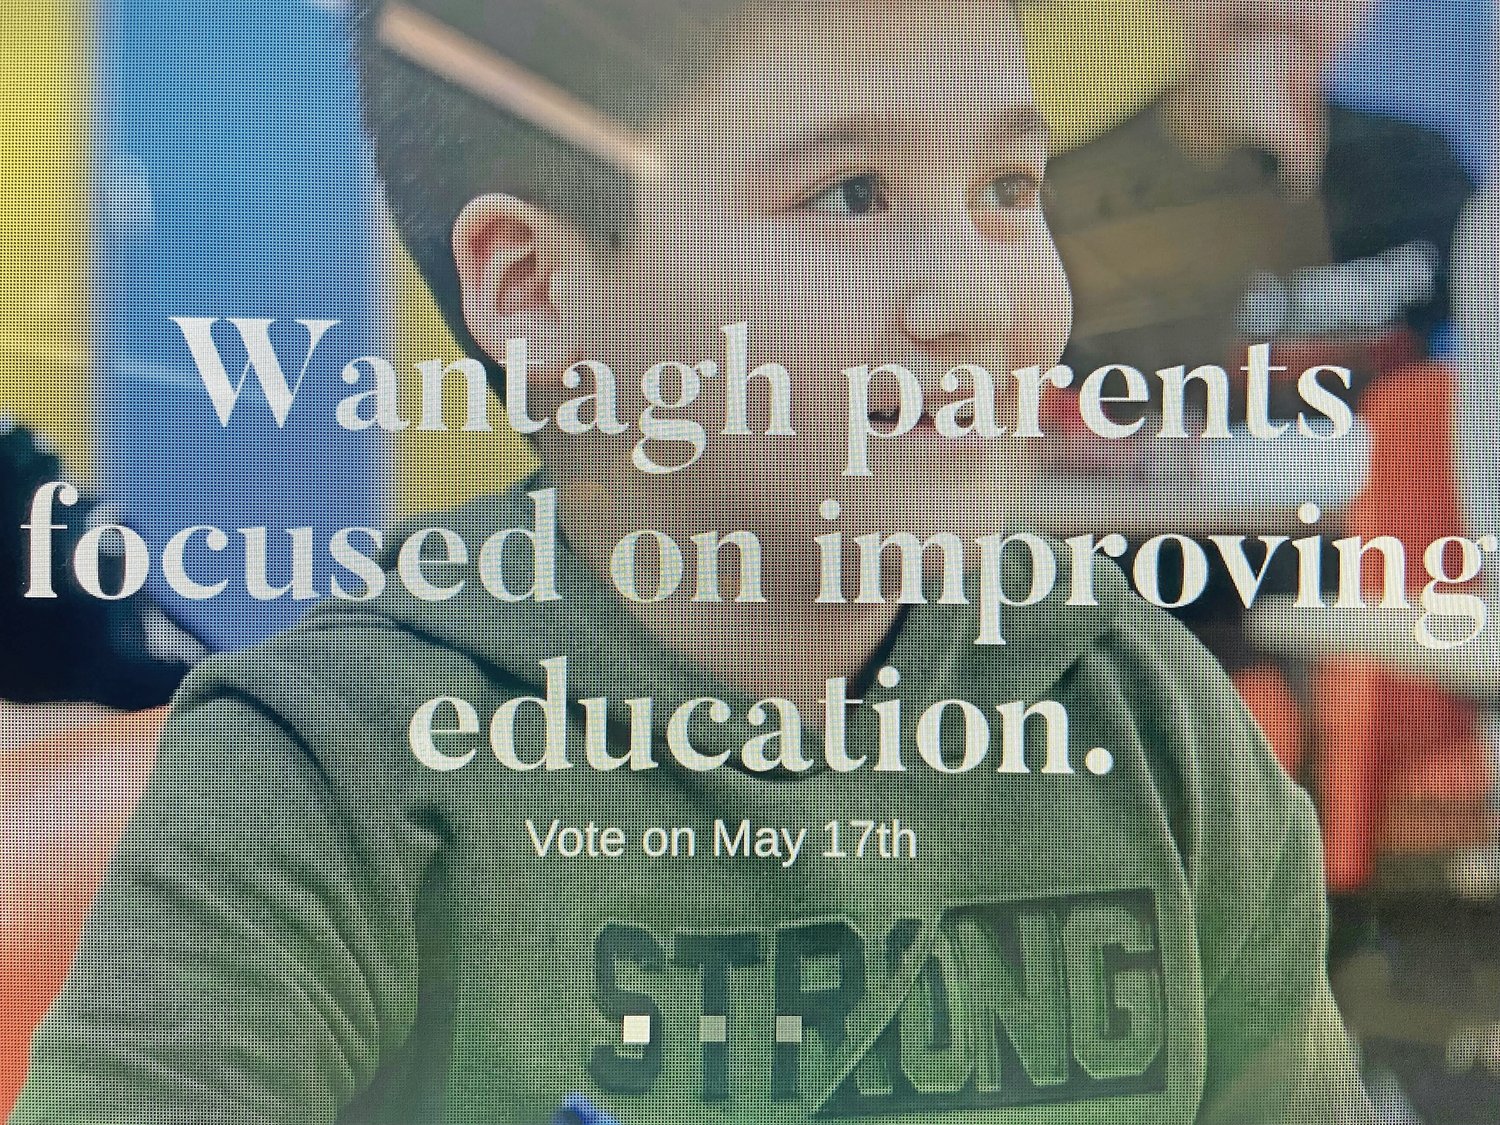 Wantagh Parents for Educational Excellence’s website home screen, where the organization hopes to share information with local parents it may not know.